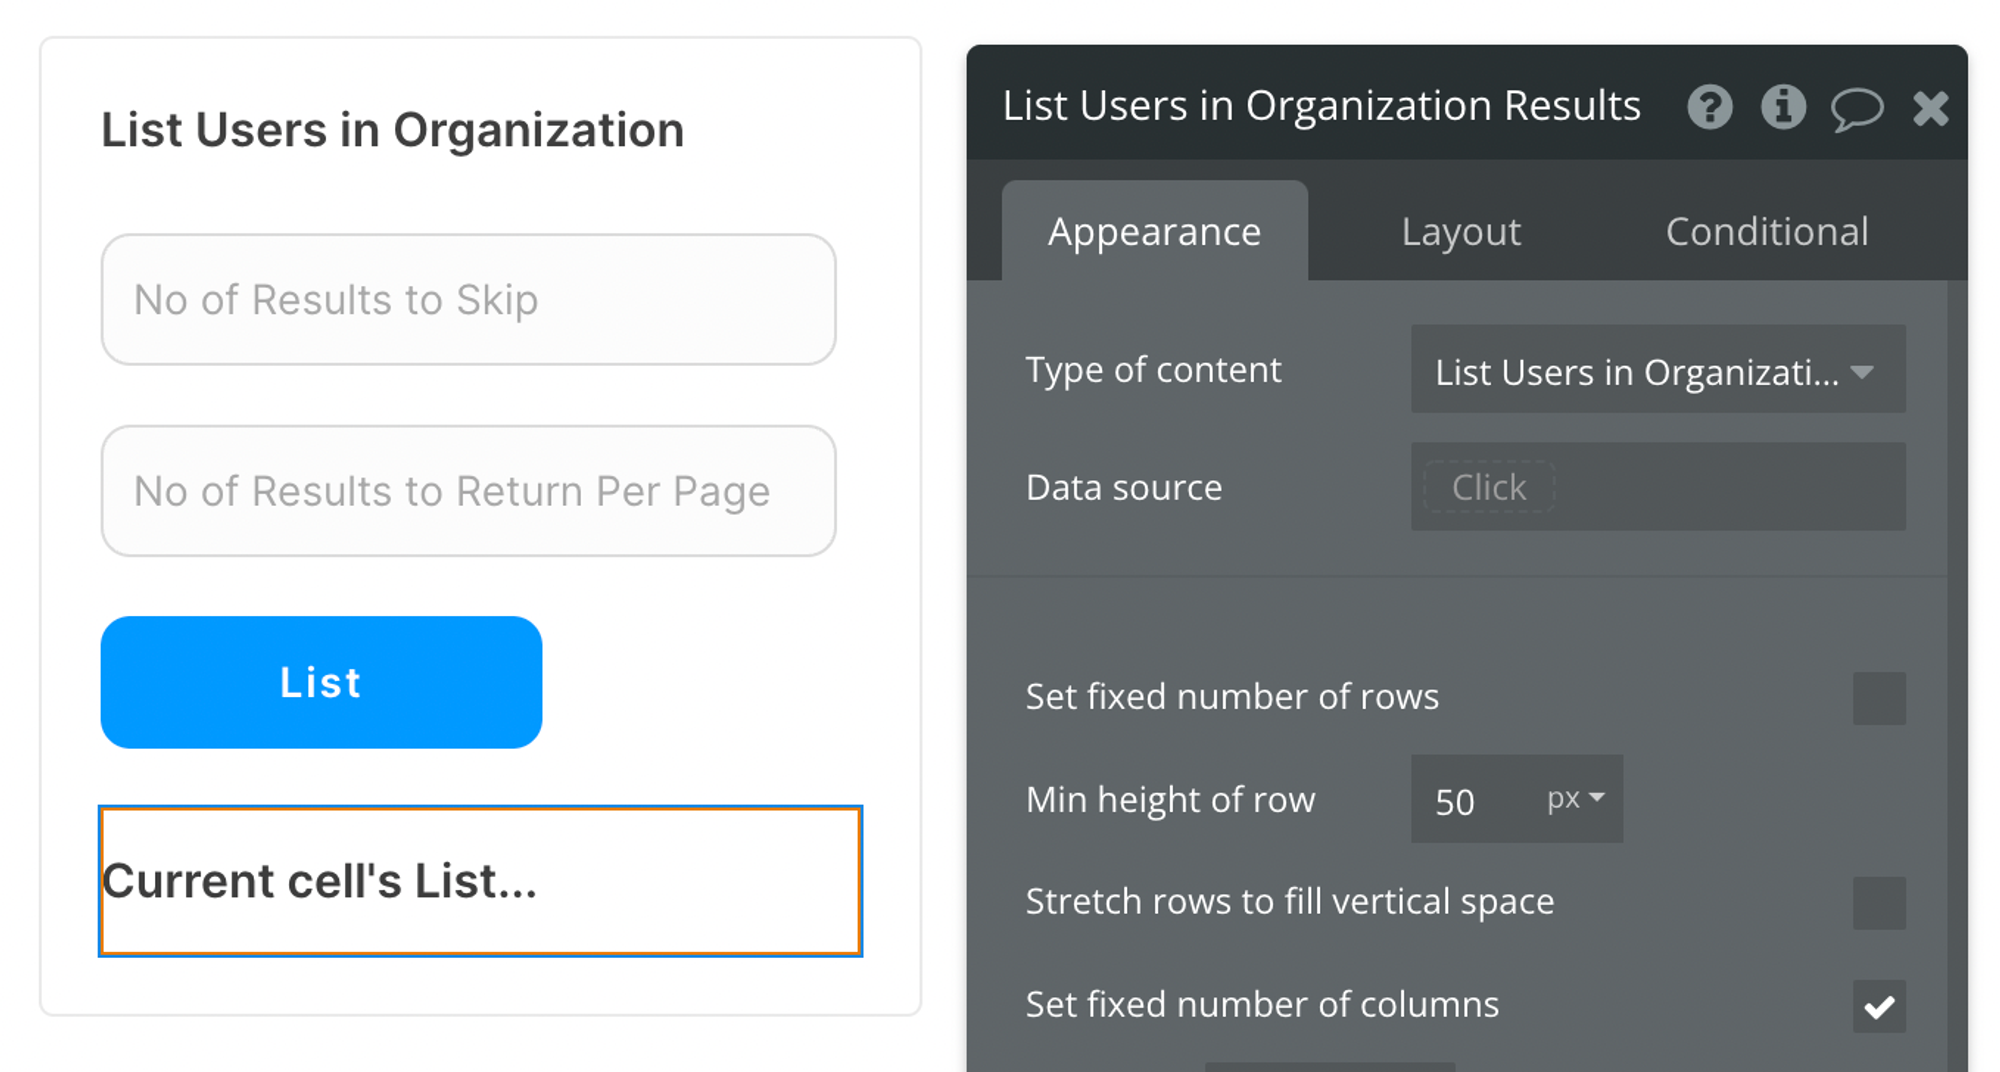 Select List Users in Organization value (Outlook) from the list of content types